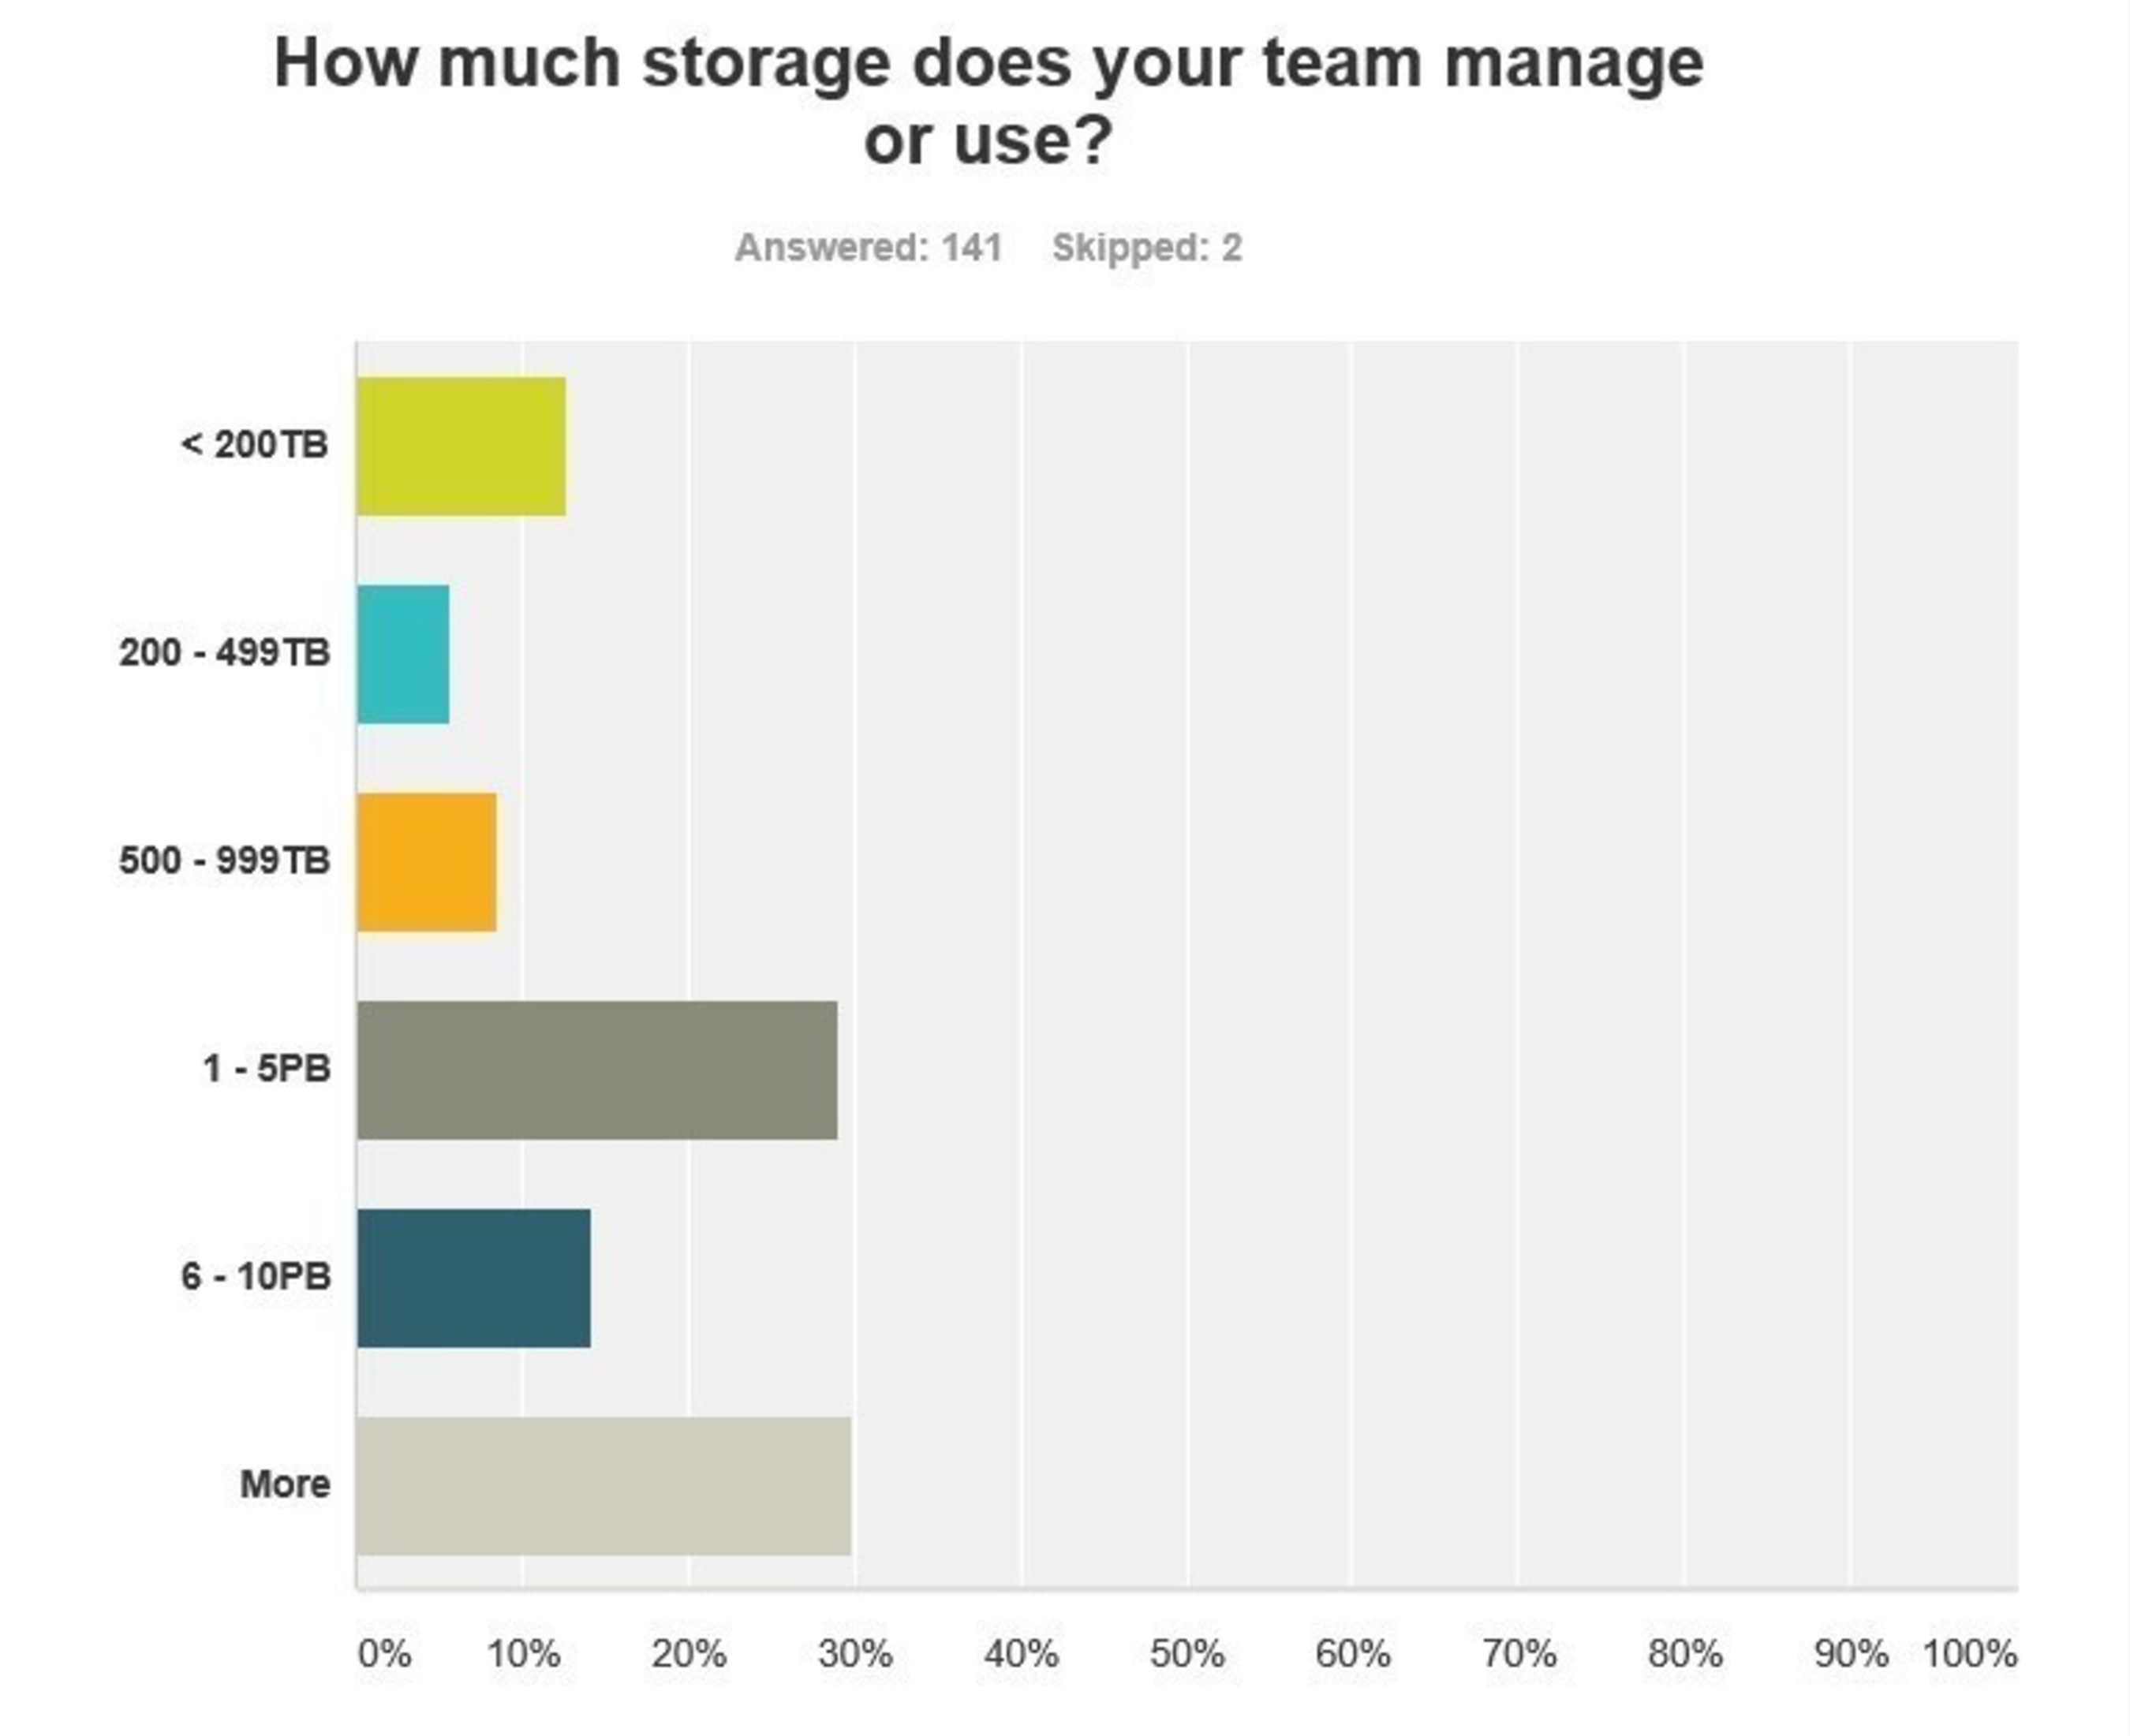 73% of High Performance Computing (HPC) Trends Survey respondents manage or use >1PB of data storage and 30% manage or use >10PBs of data storage